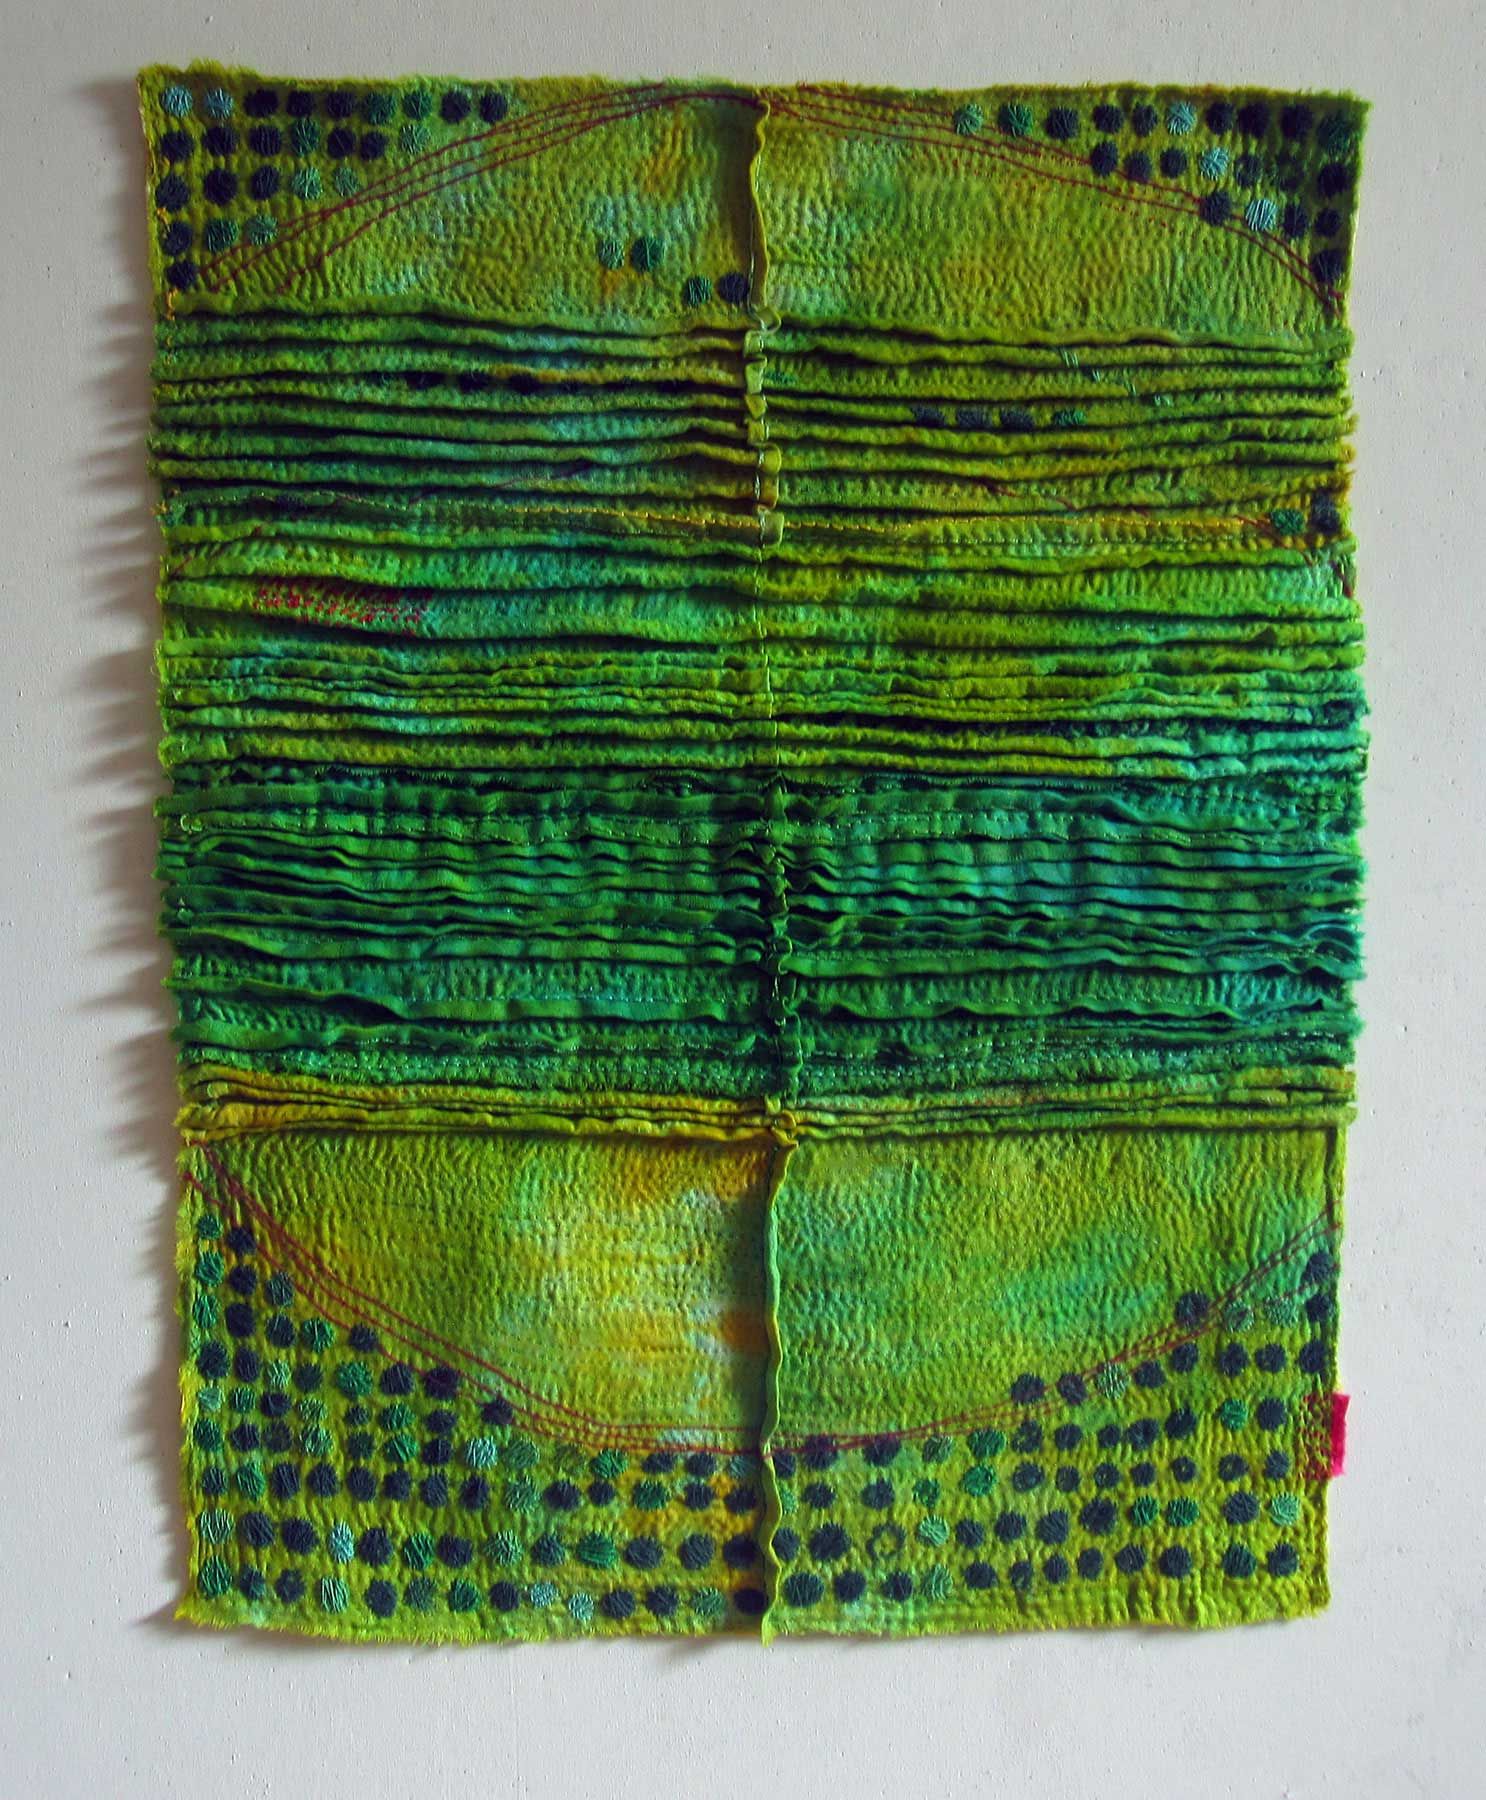 Judy Martin and The Sense of Touch | School of Stitched Textiles